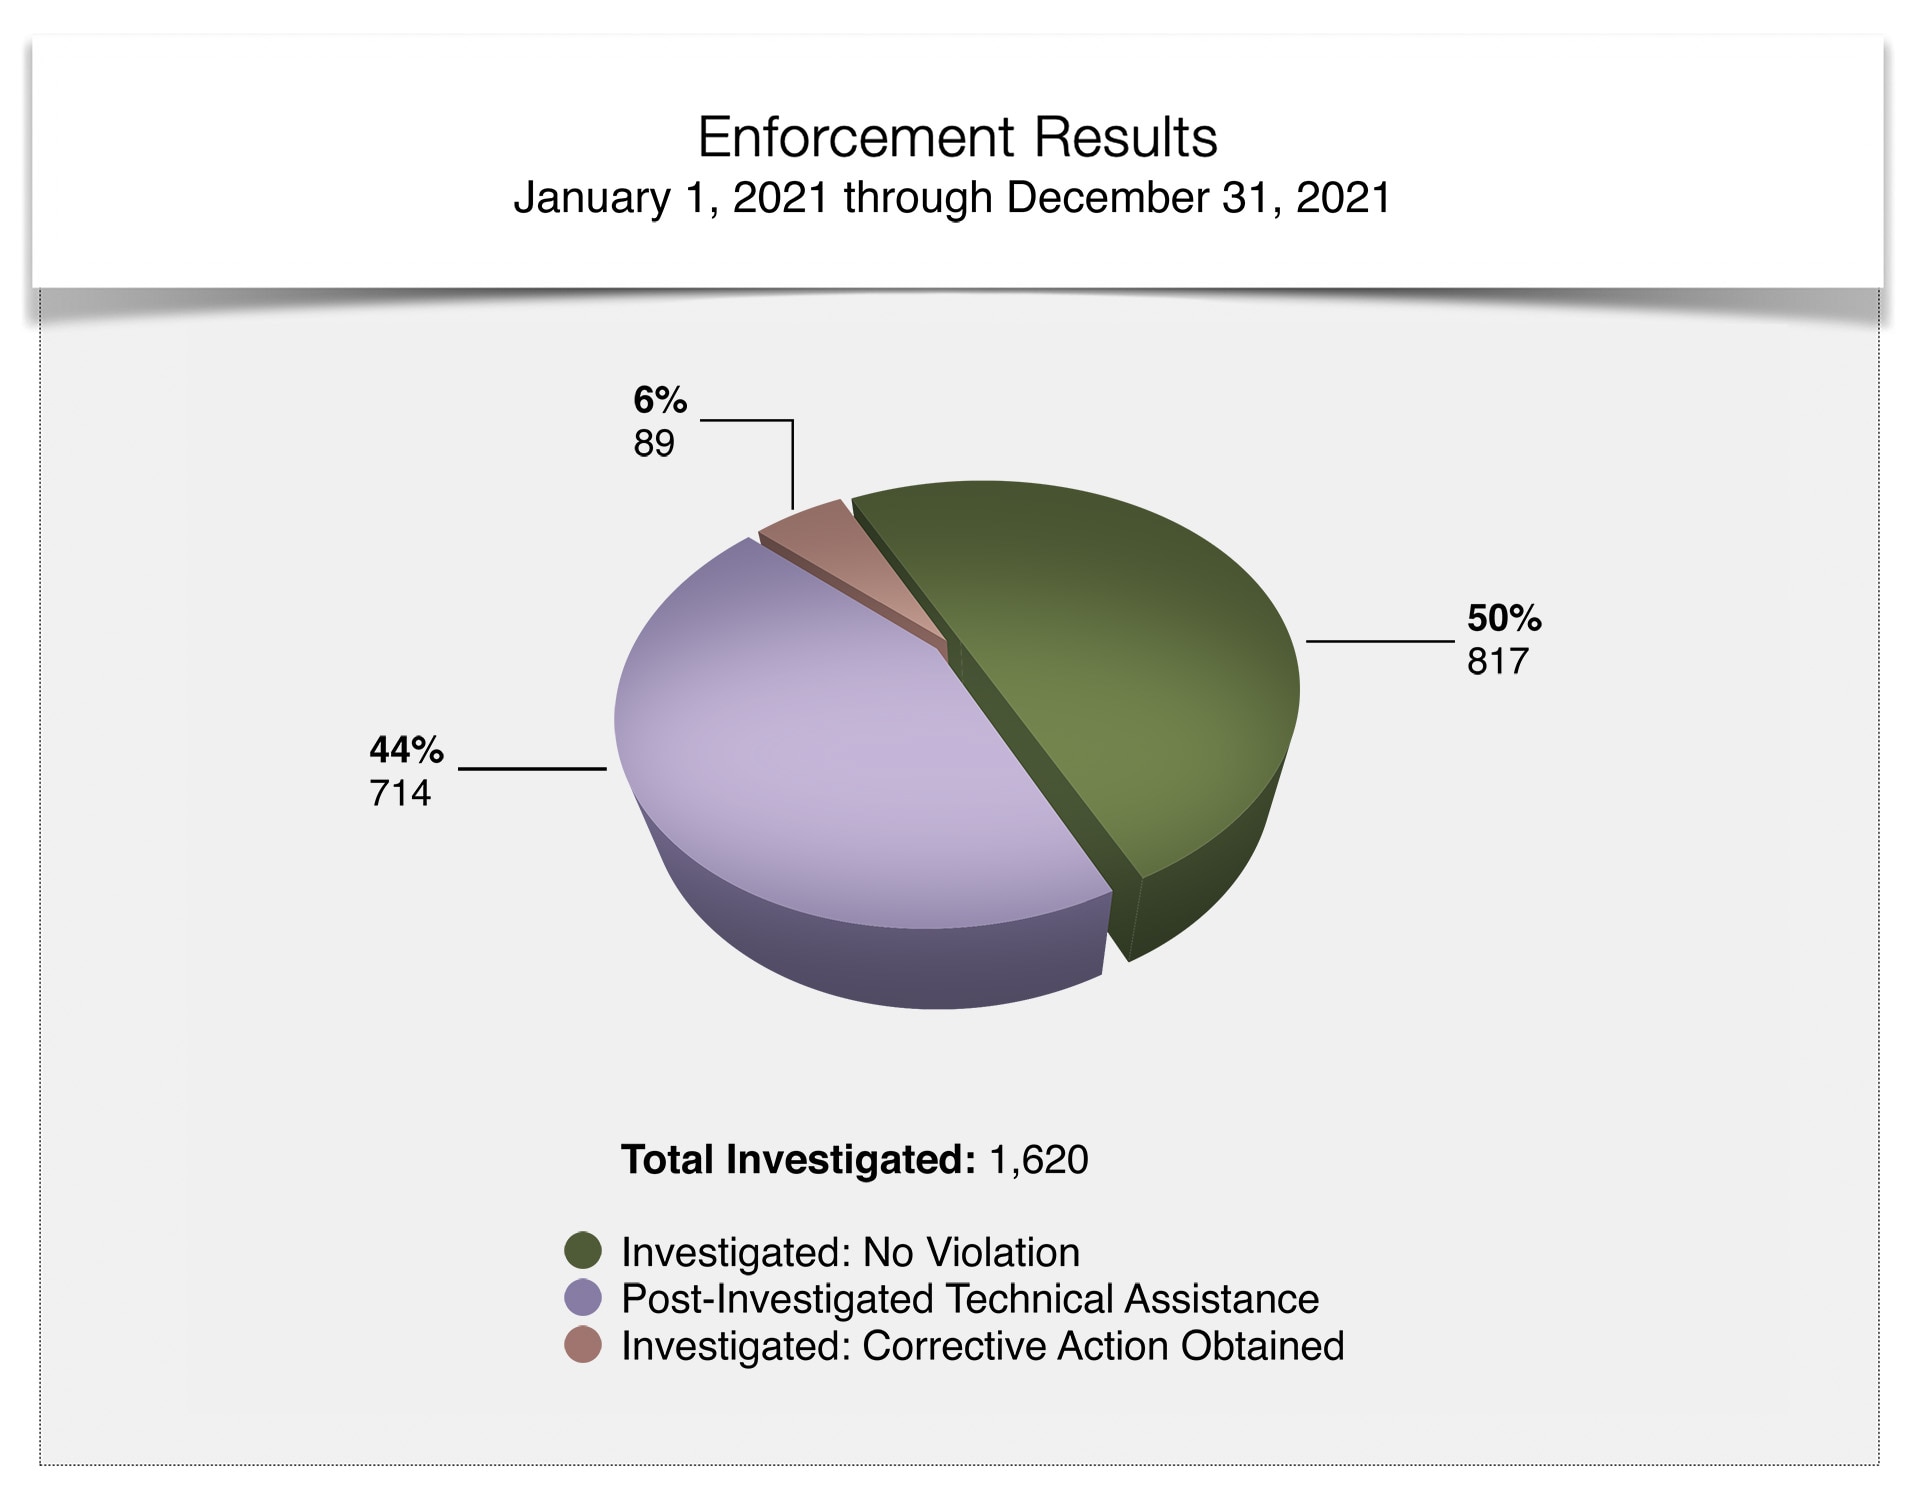 Enforcement Results - Total Investigated - January 1, 2021 through December 31, 2021